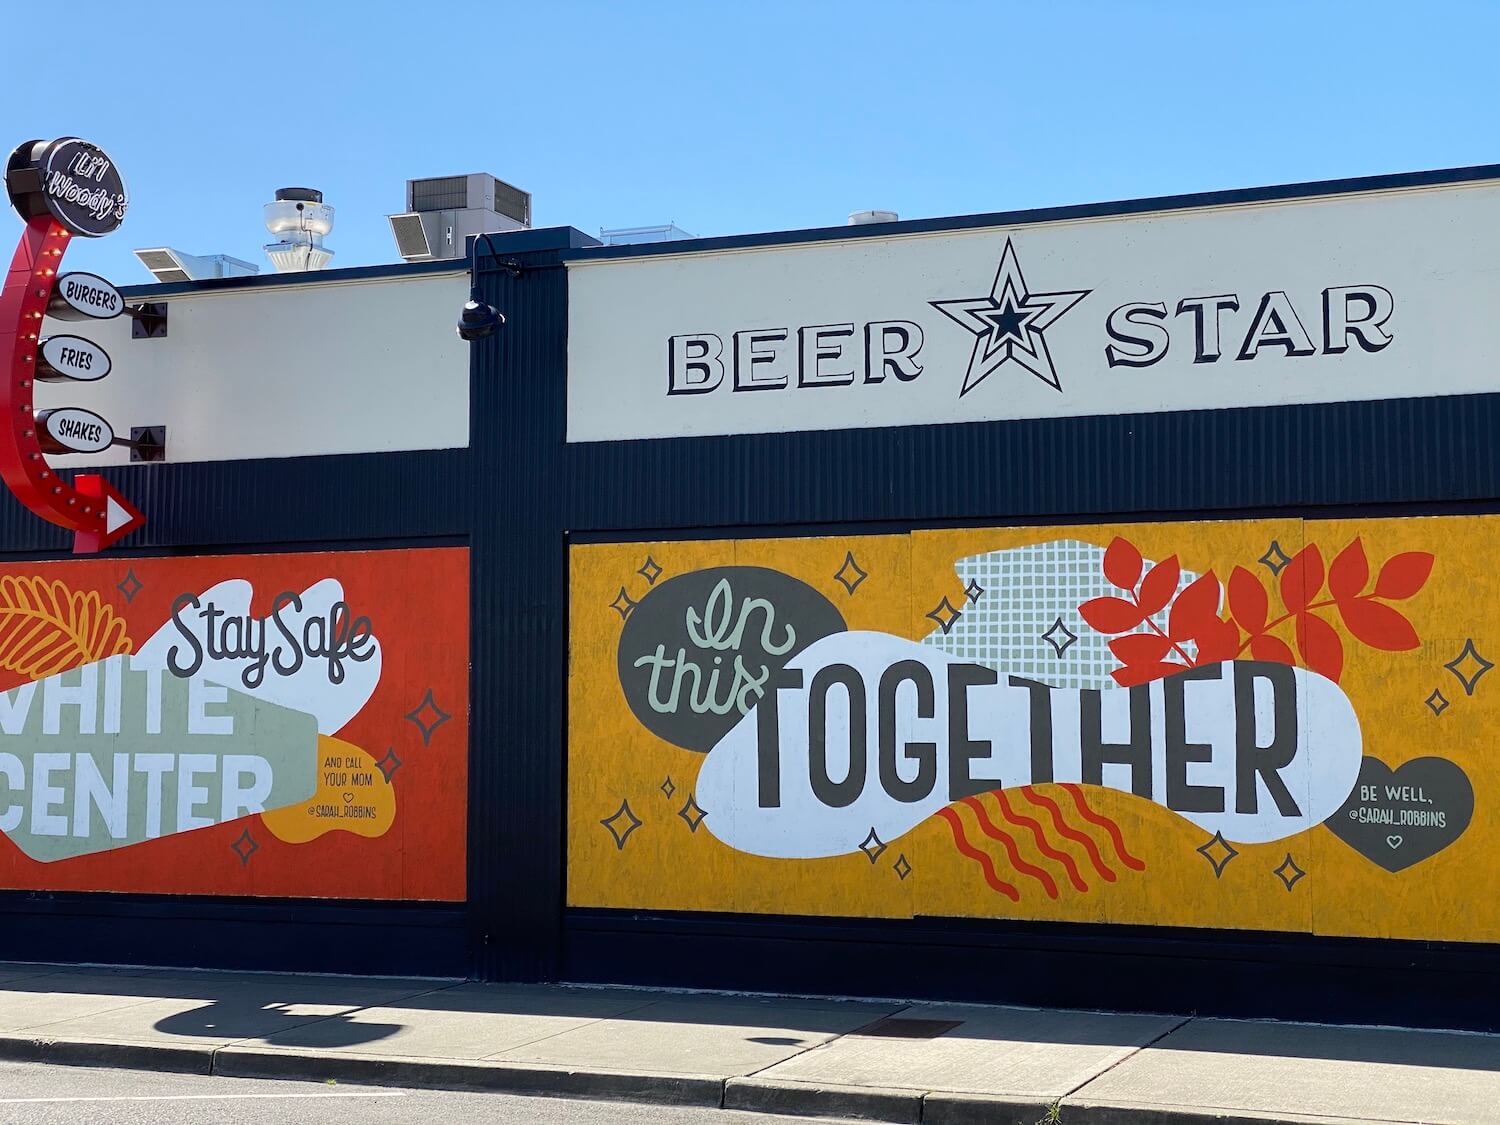 Two building murals in White Center neighborhood in Seattle say, "Stay Safe White Center" and "In This Together." The gray sidewalk sweeps under the art while the bright blue sky illuminates from above.